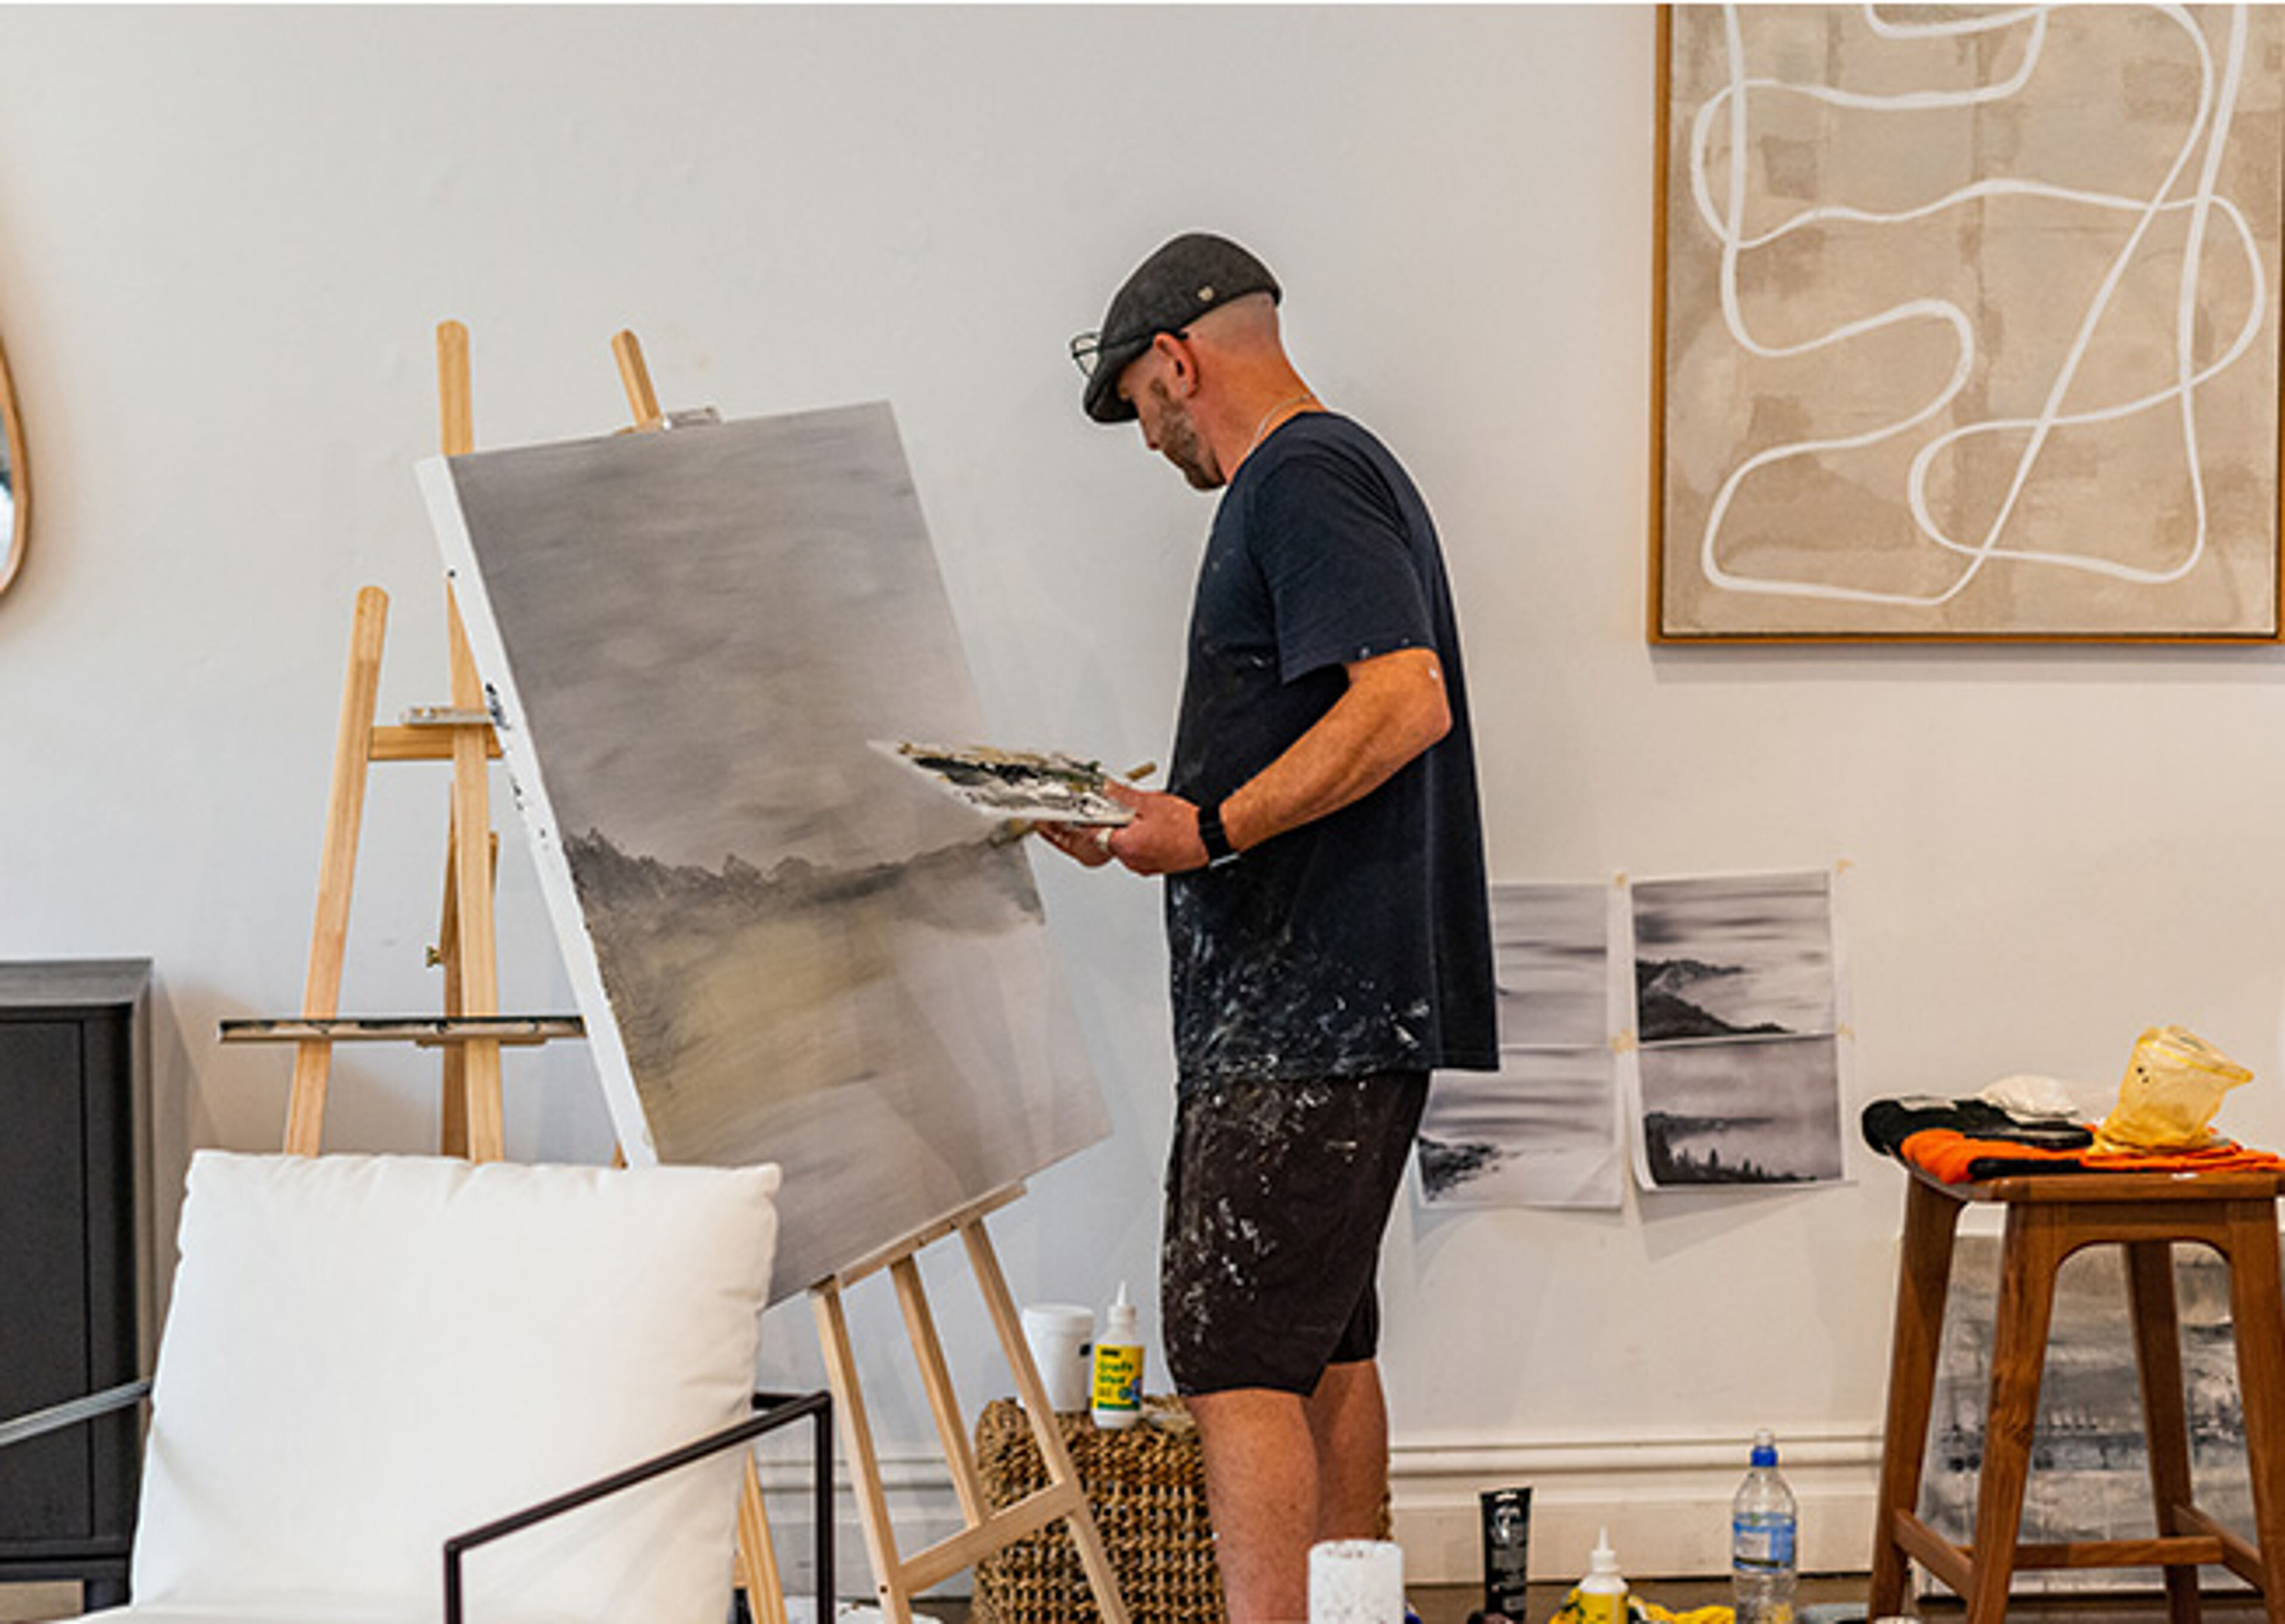 An artist immersed in his craft, the studio a canvas itself for the creative process unfolding.